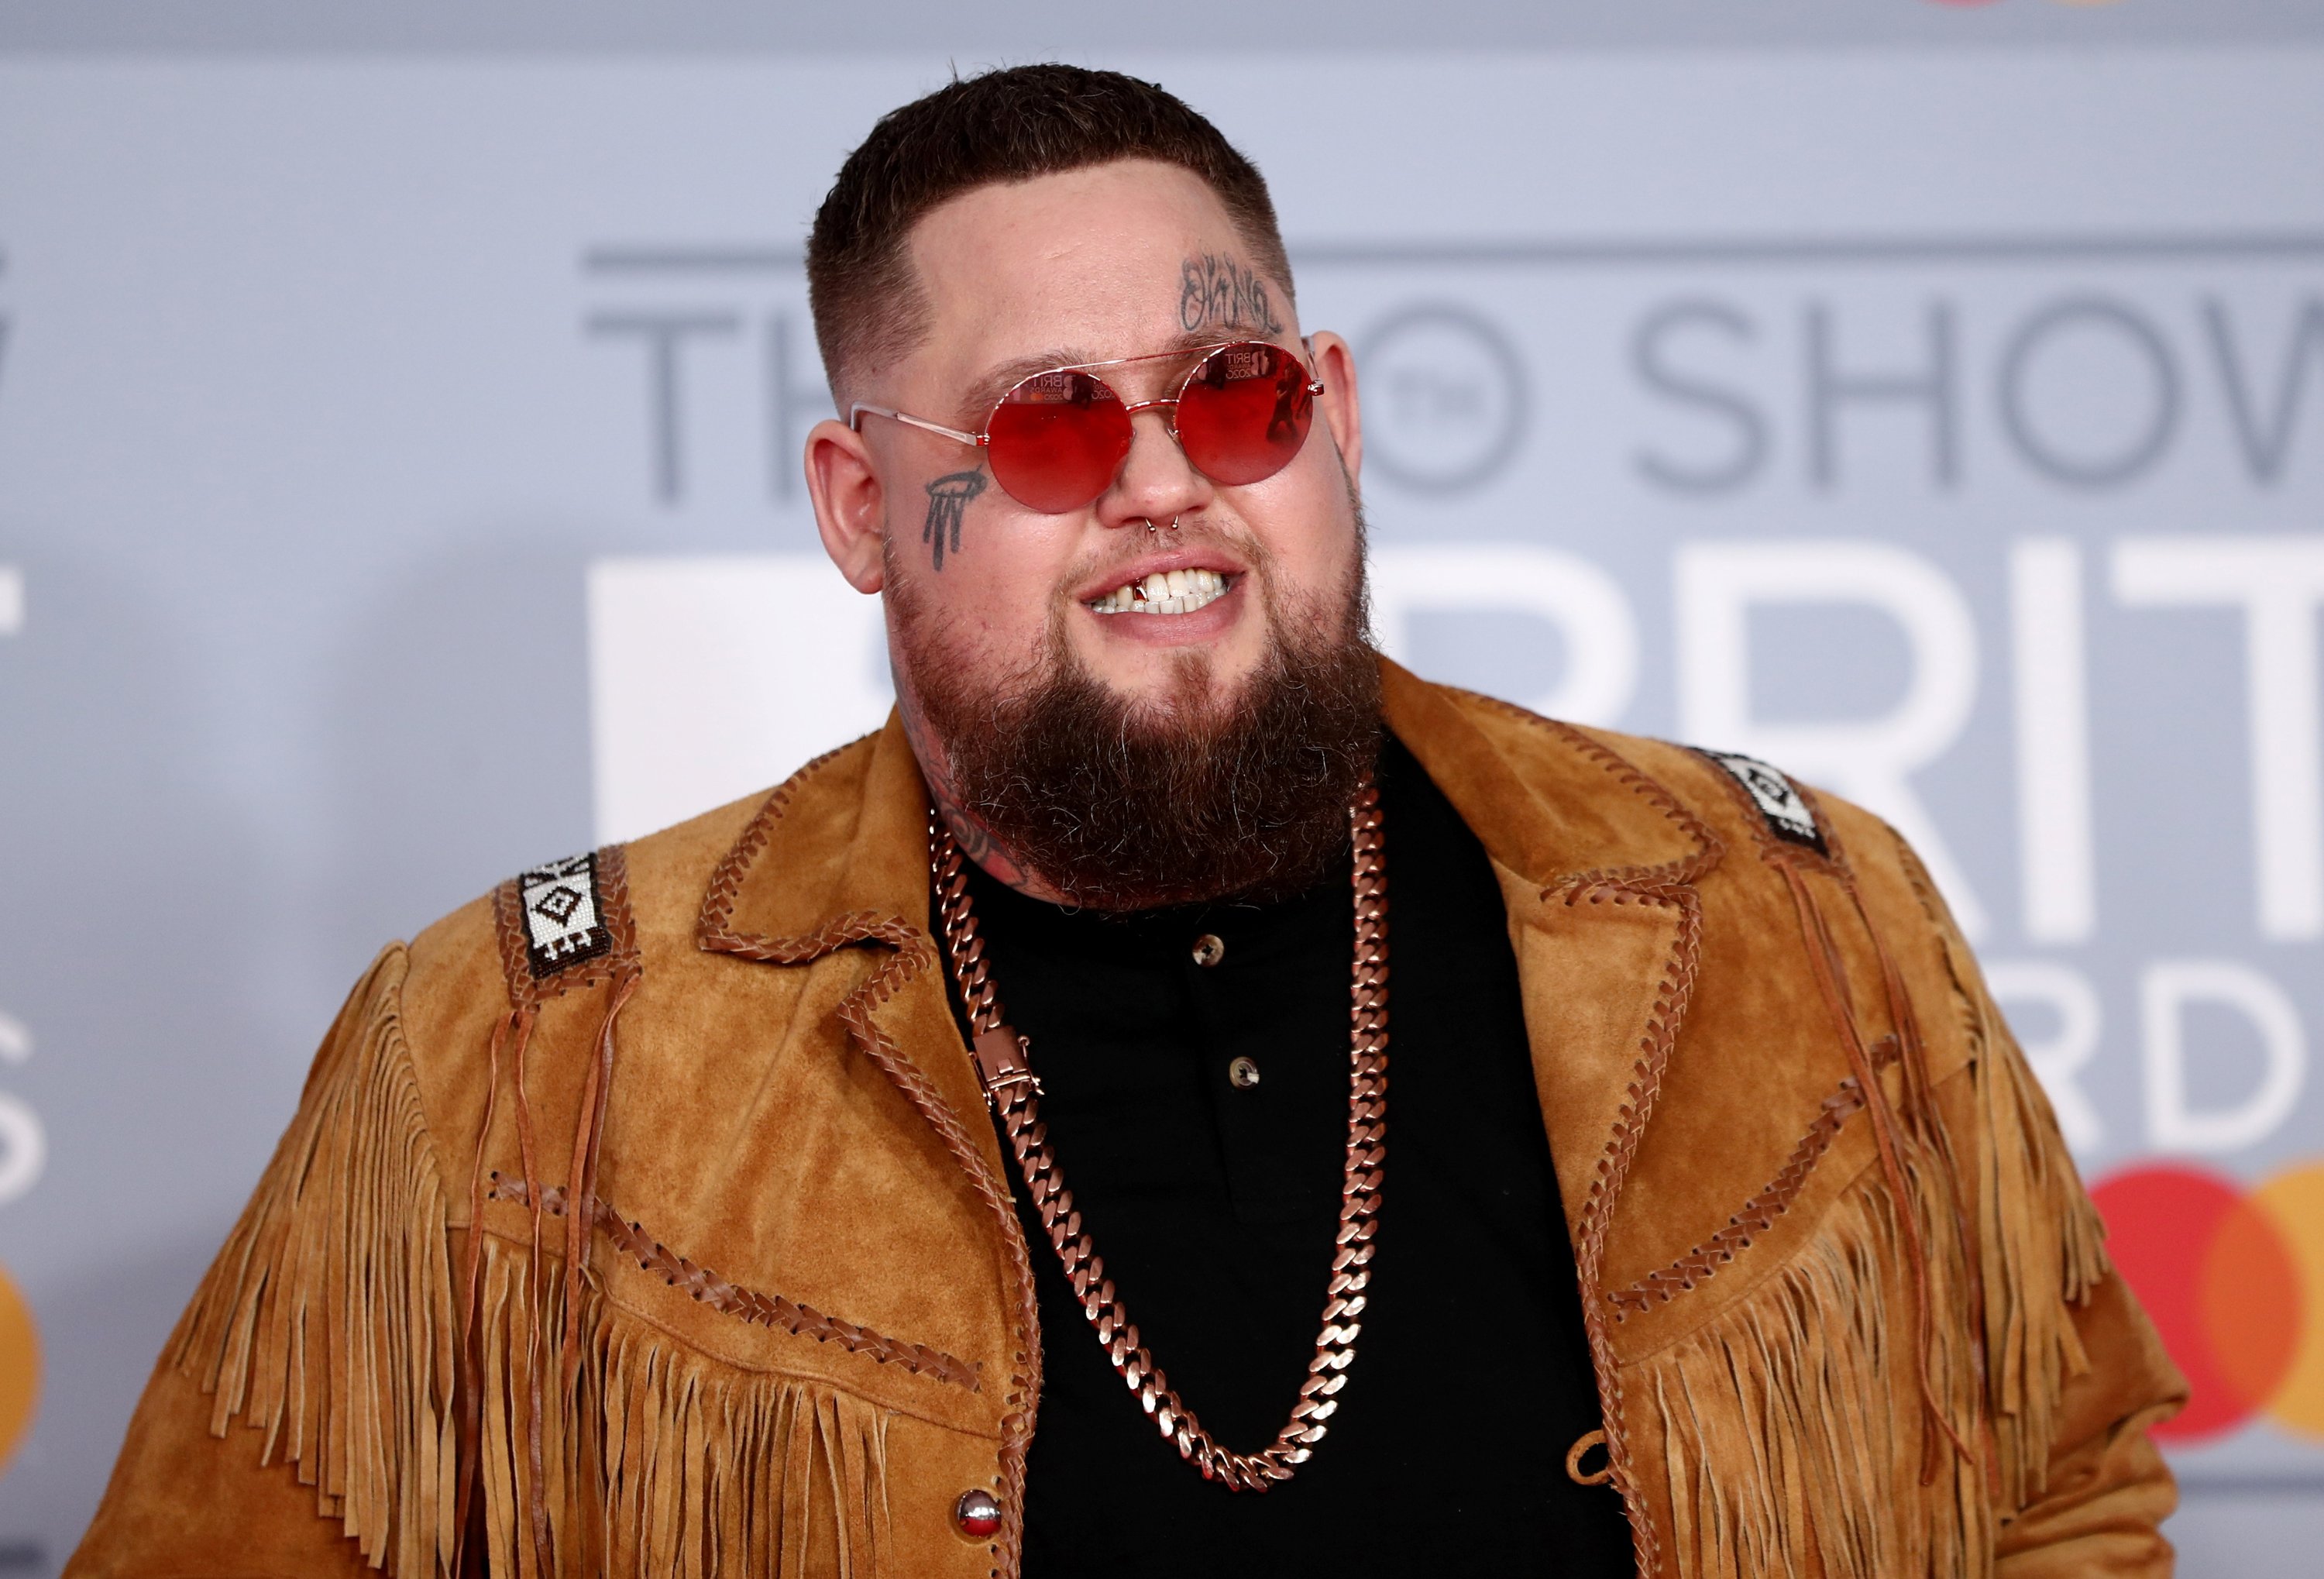 Rag'n'Bone Man poses as he arrives for the Brit Awards at the O2 Arena in London, U.K., Feb. 18, 2020. (Reuters Photo)